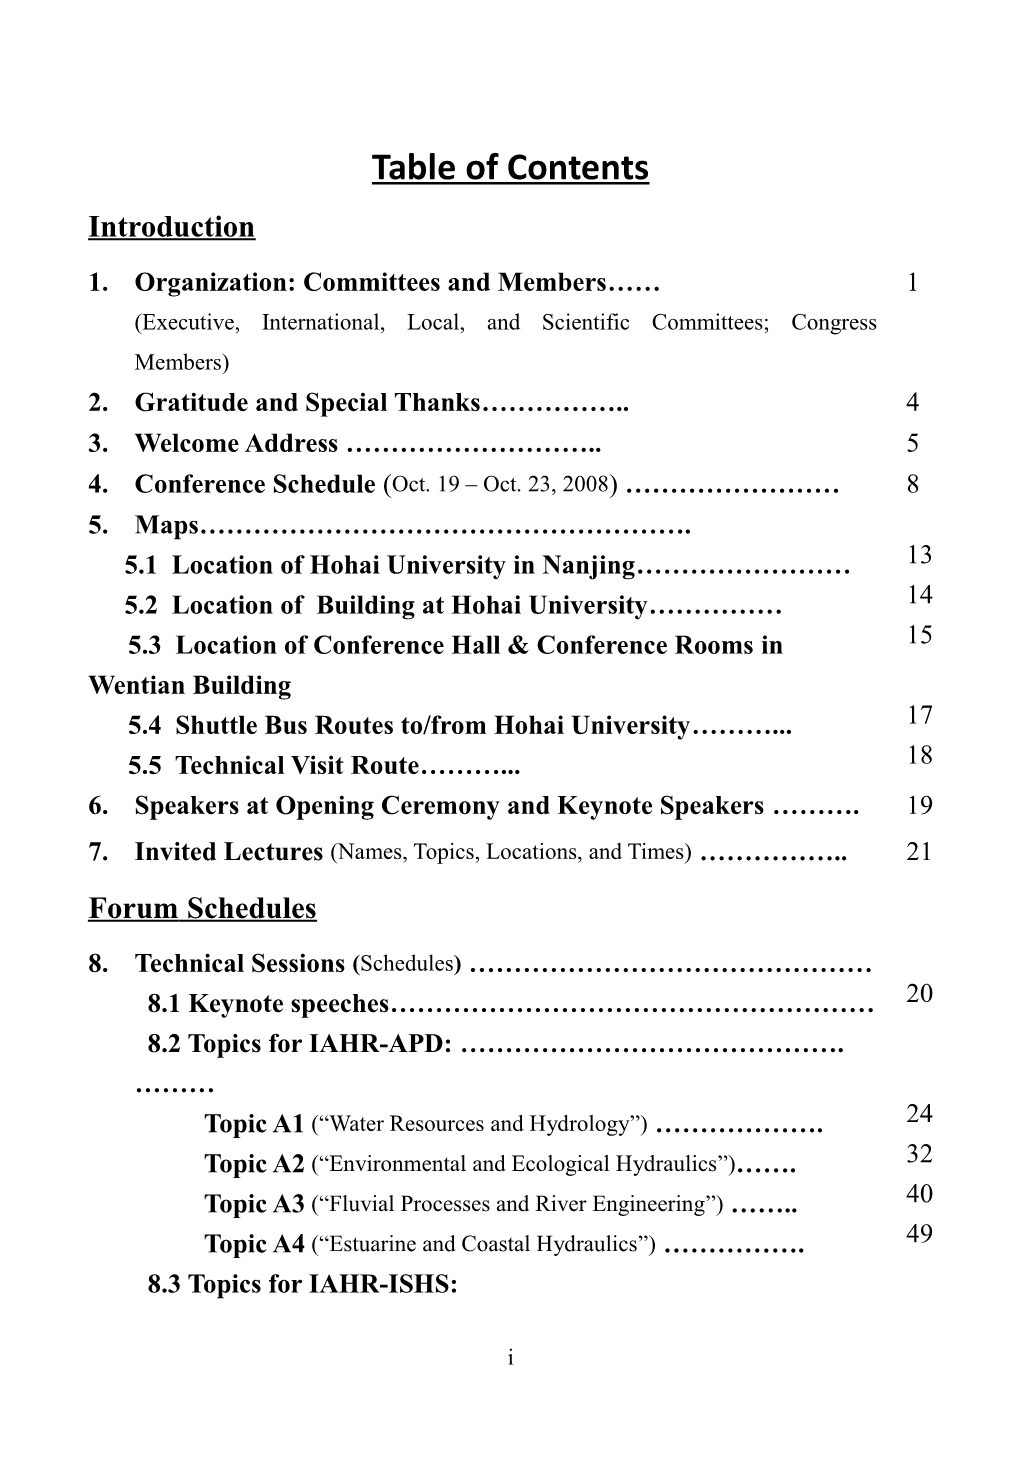 Table of Contents s38